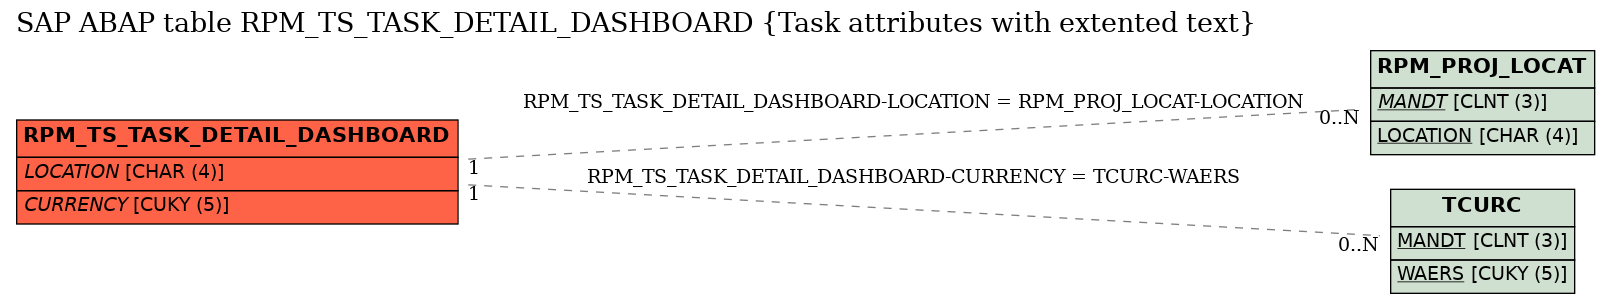 E-R Diagram for table RPM_TS_TASK_DETAIL_DASHBOARD (Task attributes with extented text)